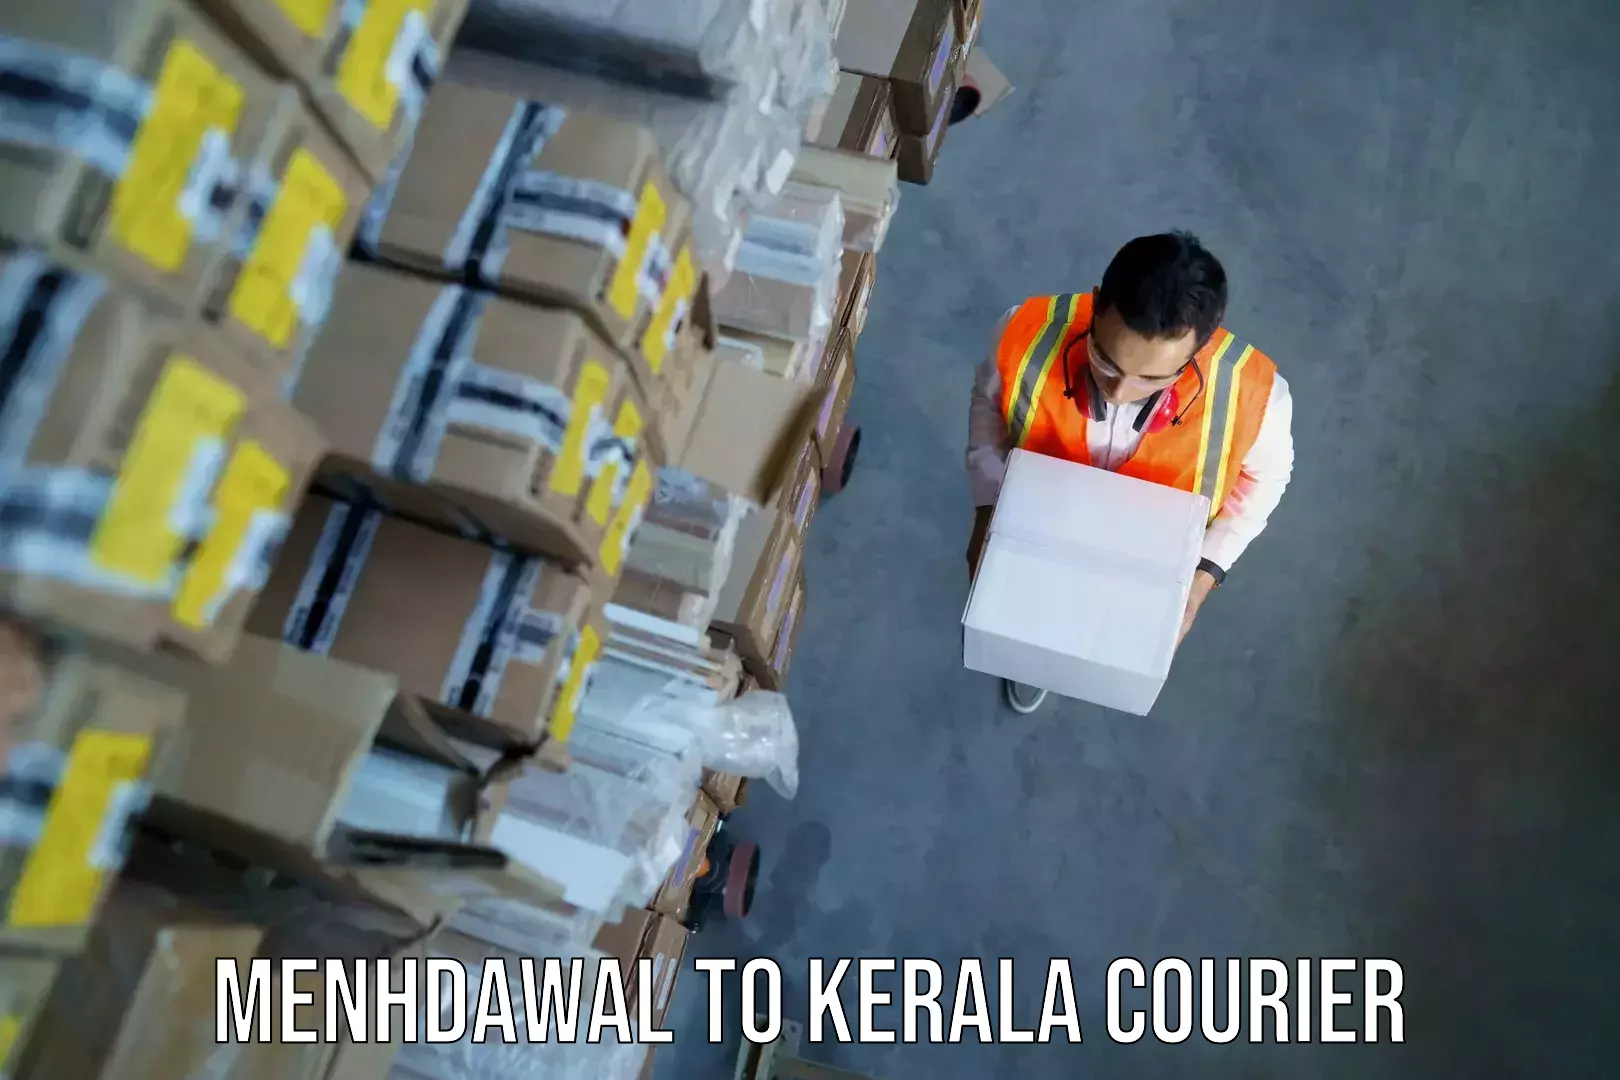 Baggage relocation service Menhdawal to Kalluvathukkal